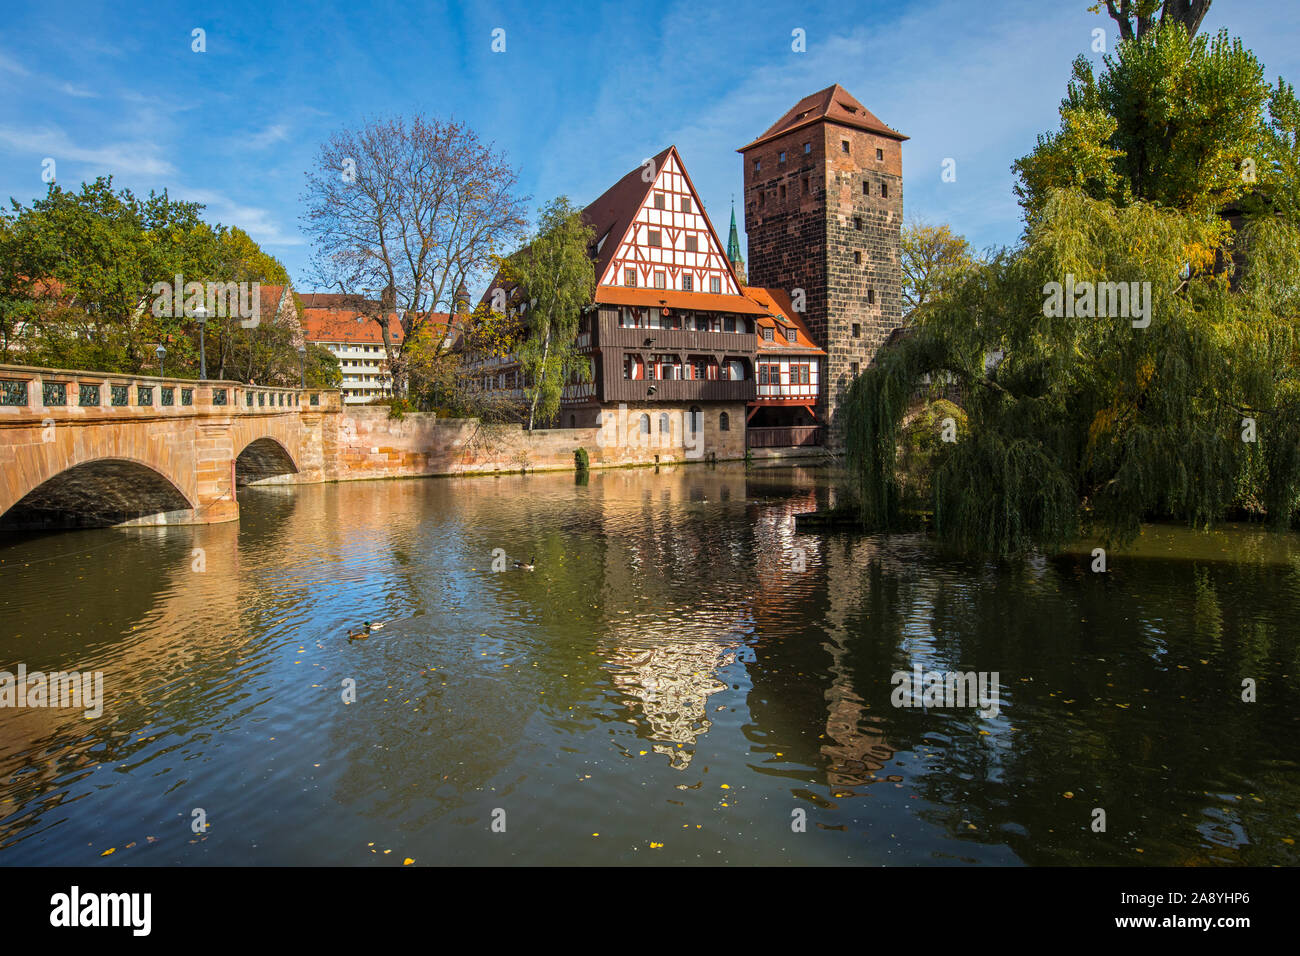 The beautiful view over the Pegnitz river towards Weinstadel House, Hangmans Tower and the Maxbrucke stone bridge, in the city of Nuremberg, Germany. Stock Photo